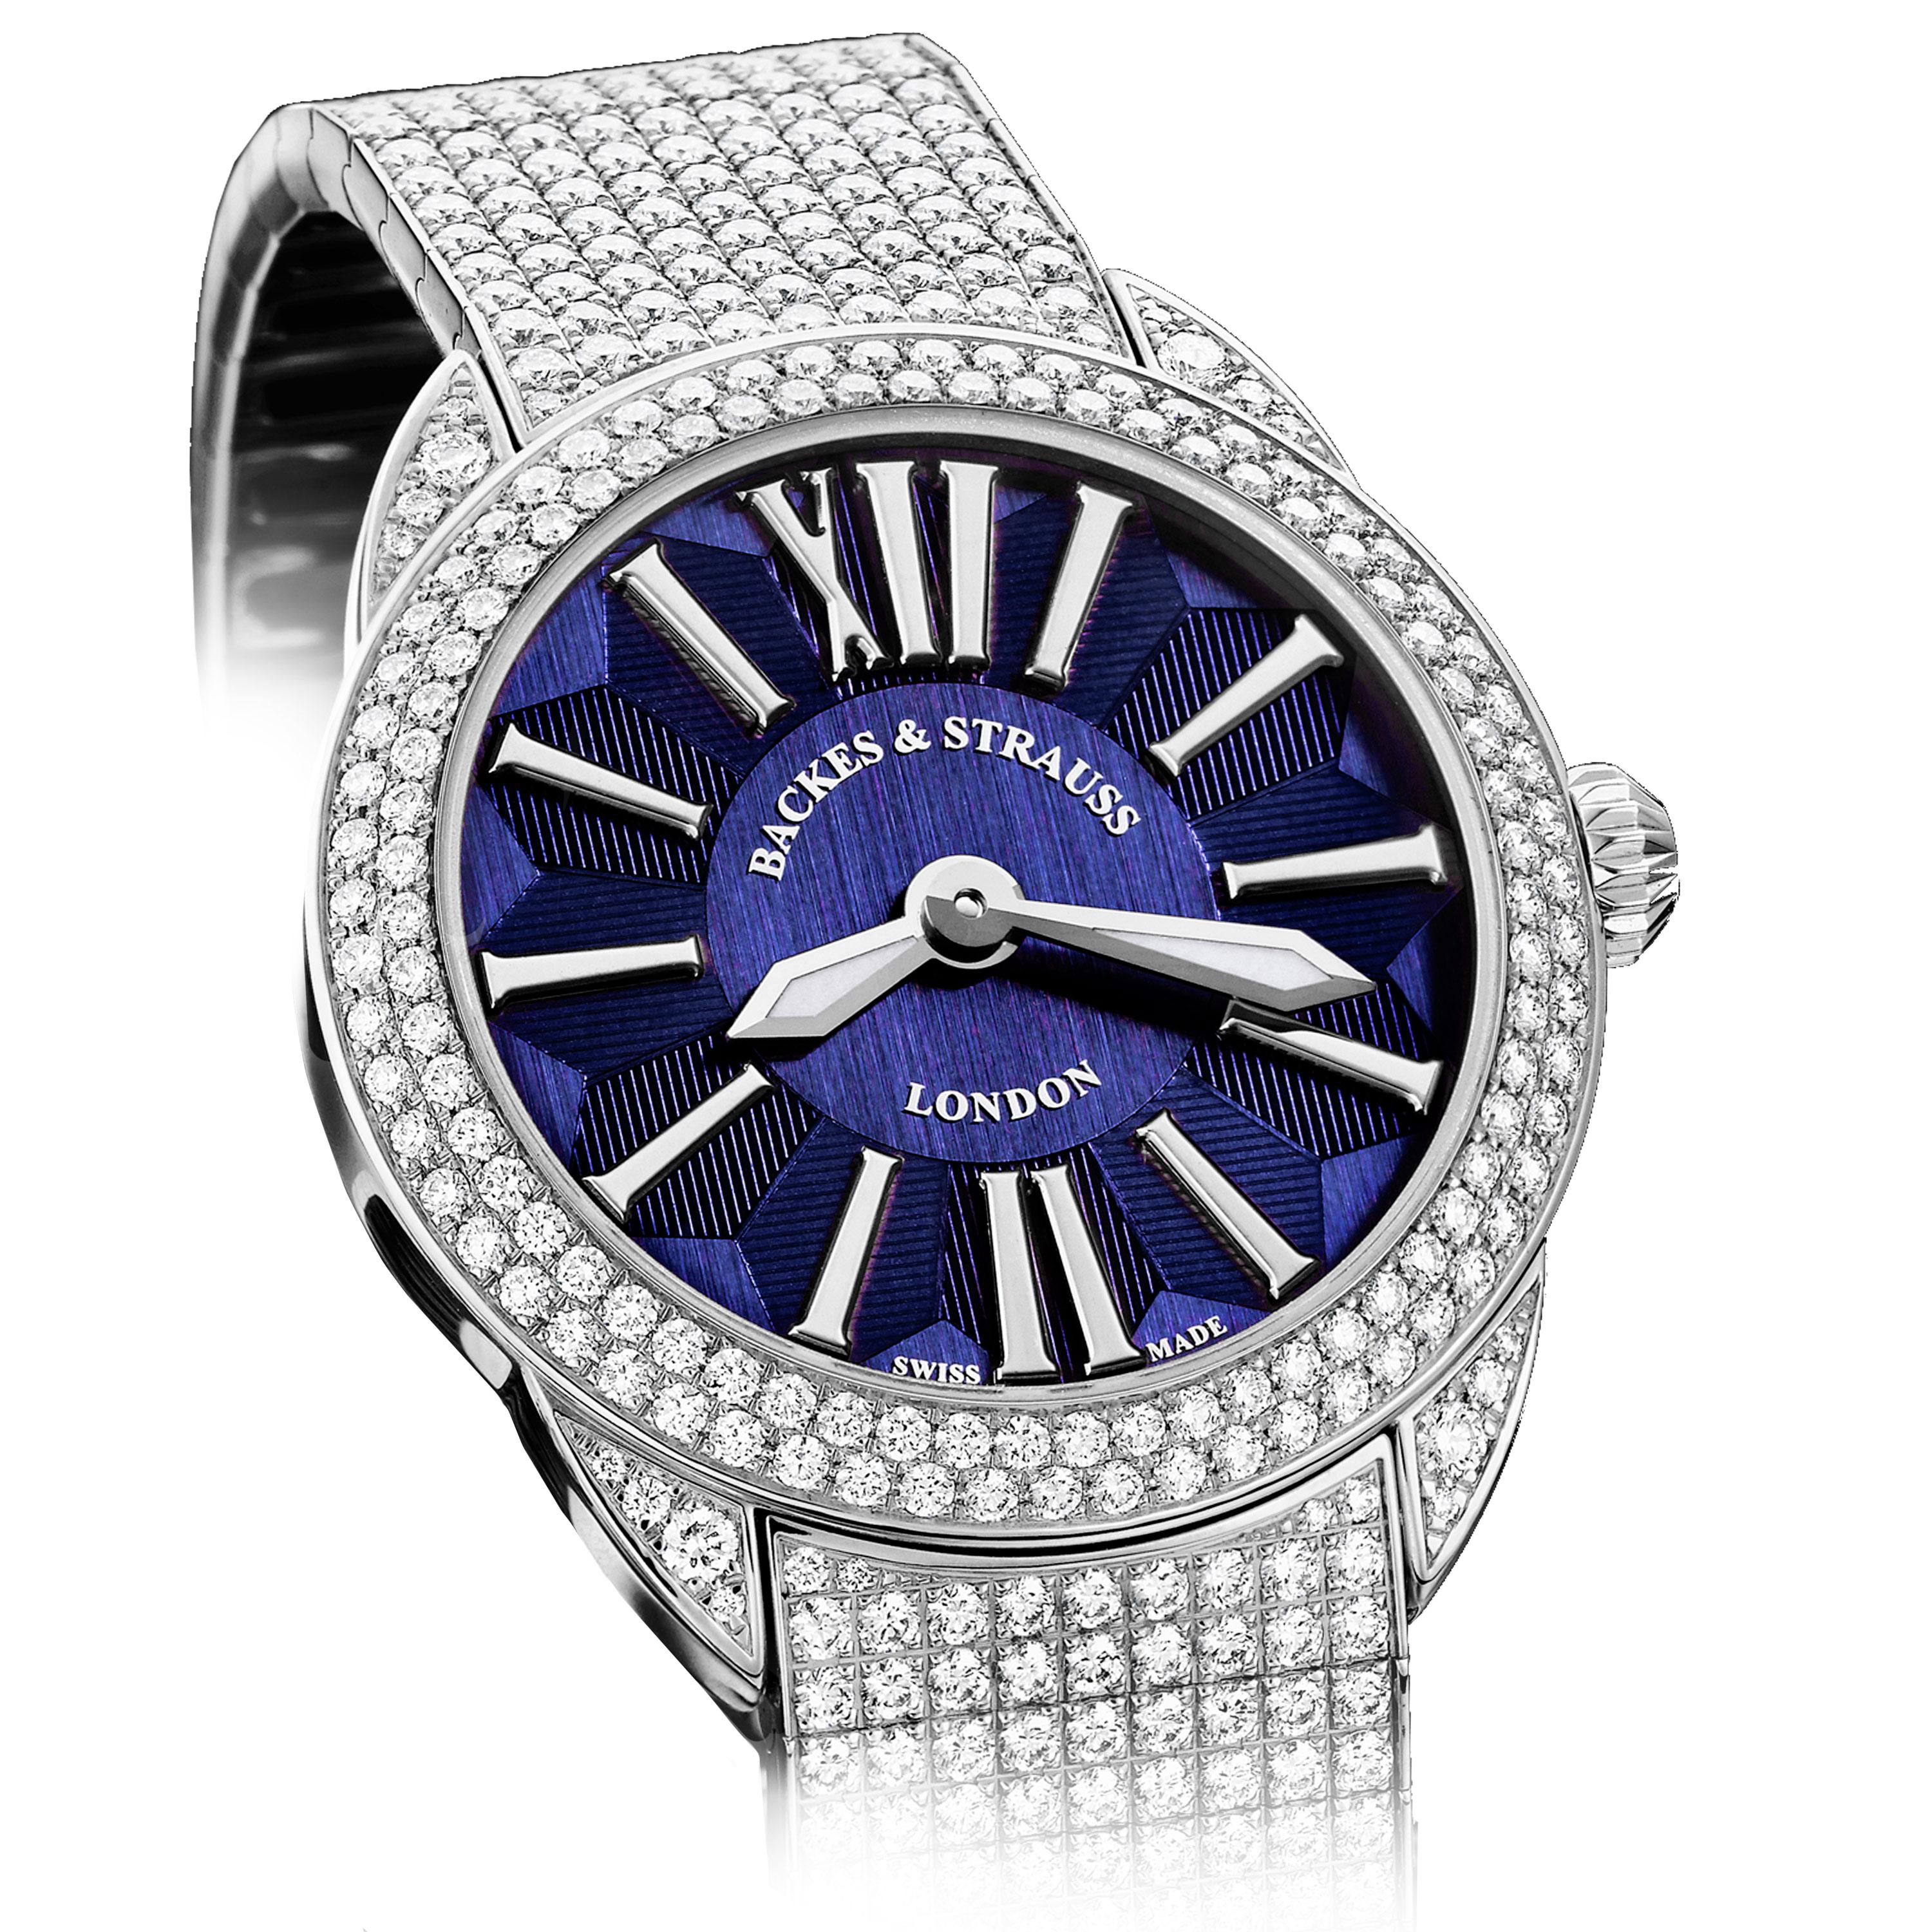 The Piccadilly Renaissance 40 is a luxury diamond watch for men and women crafted in 18kt White gold, featuring the blue dial and white gold roman numerals, mechanical movement.  The case, bracelet, buckle and crown are set with white Ideal Cut